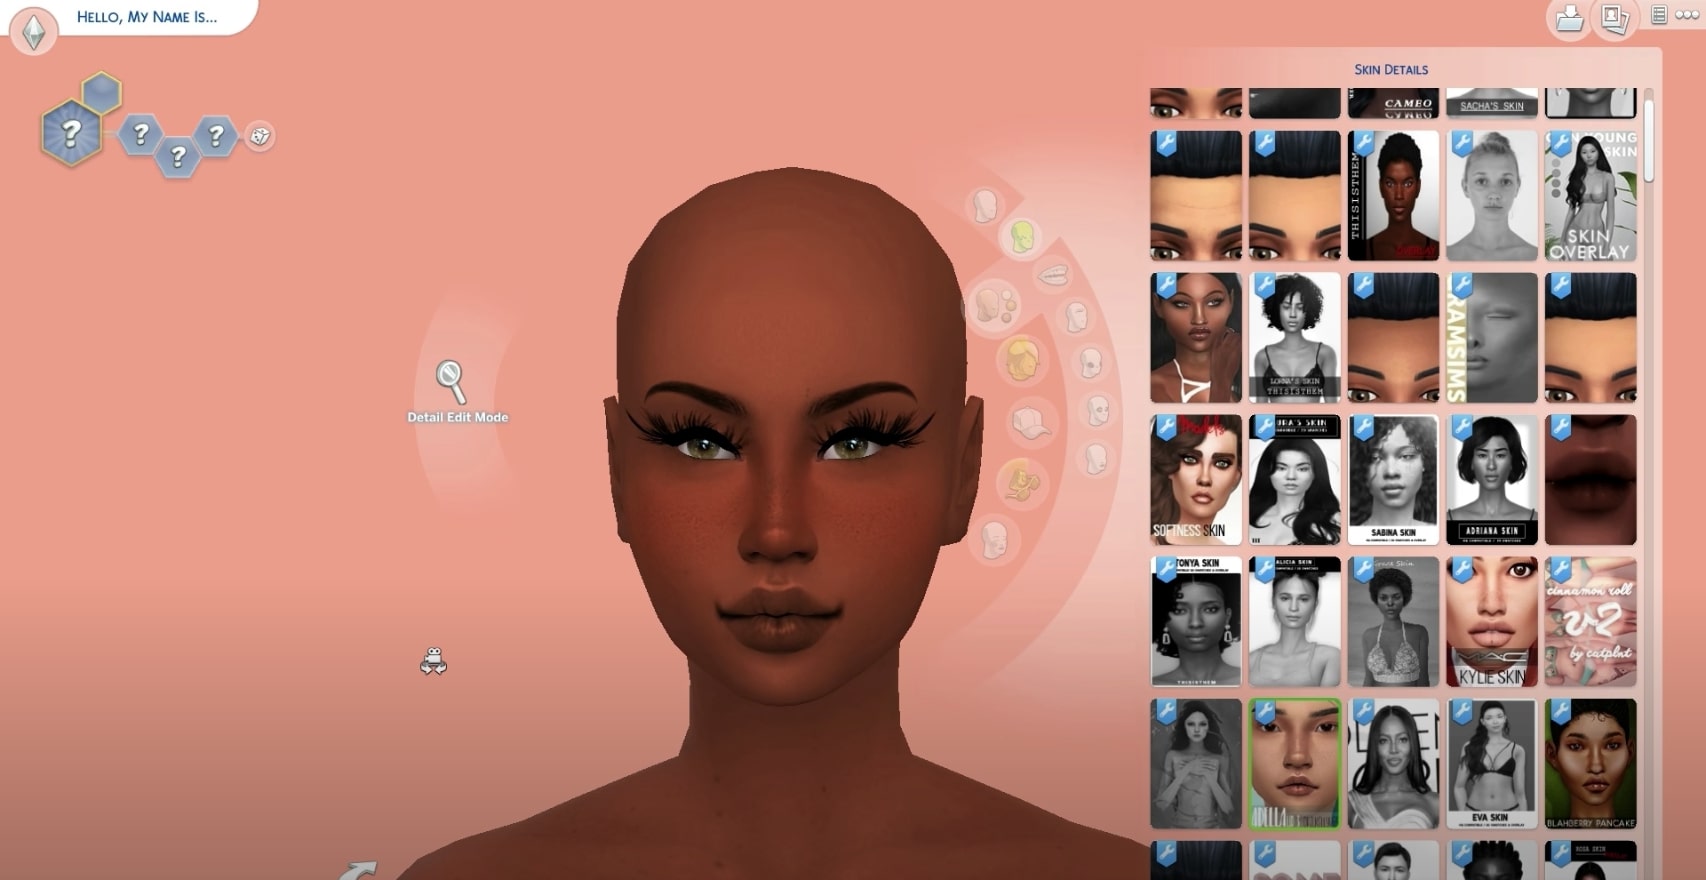 4. The Sims 3: 10 Best Hair Mods For The Game - wide 9